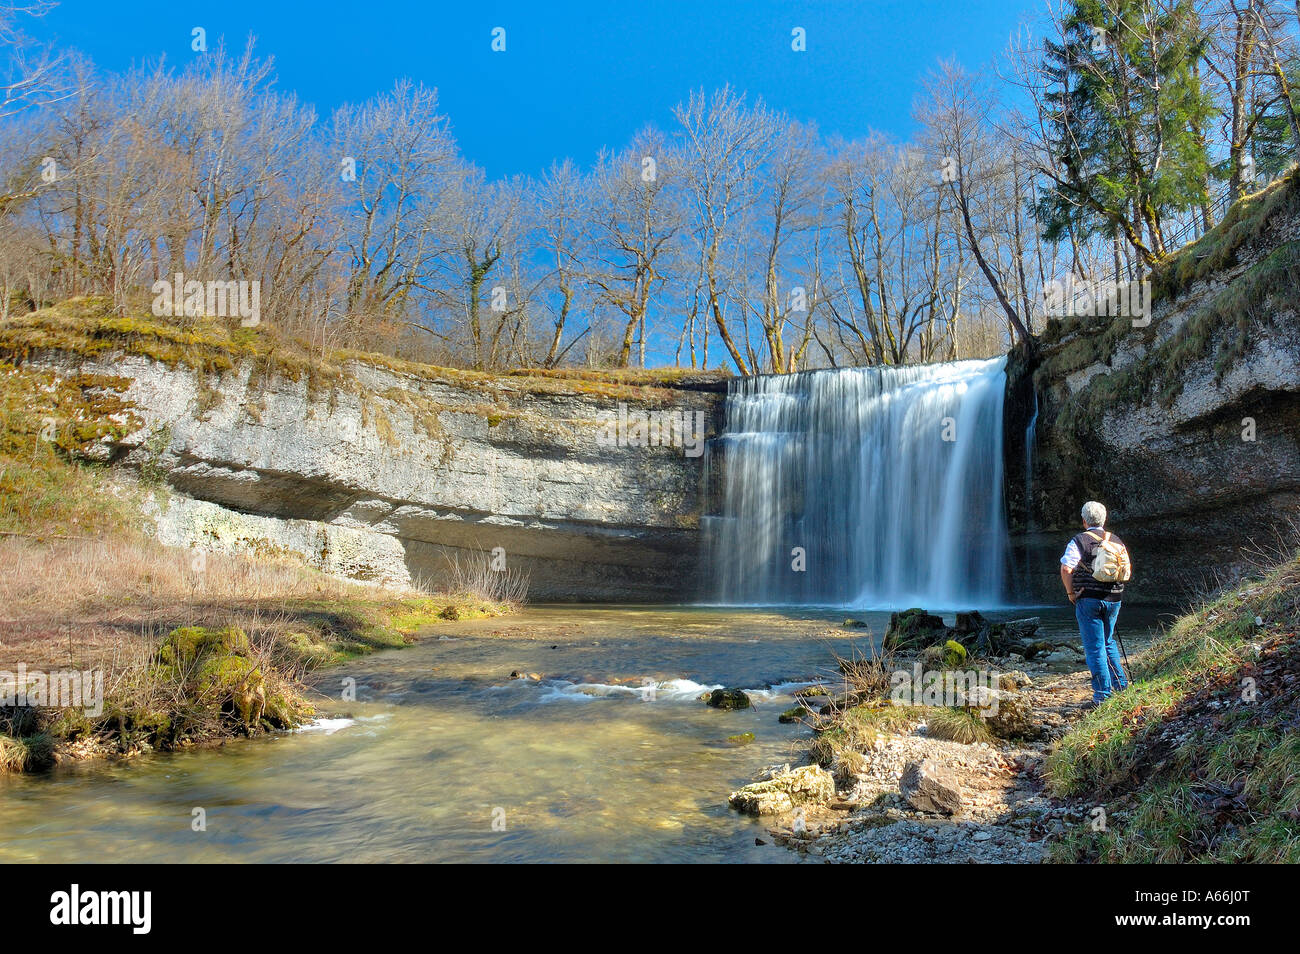 The 'Saut de la Forge' waterfall in the chain of falls on the Herisson River in the French Jura mountains Stock Photo